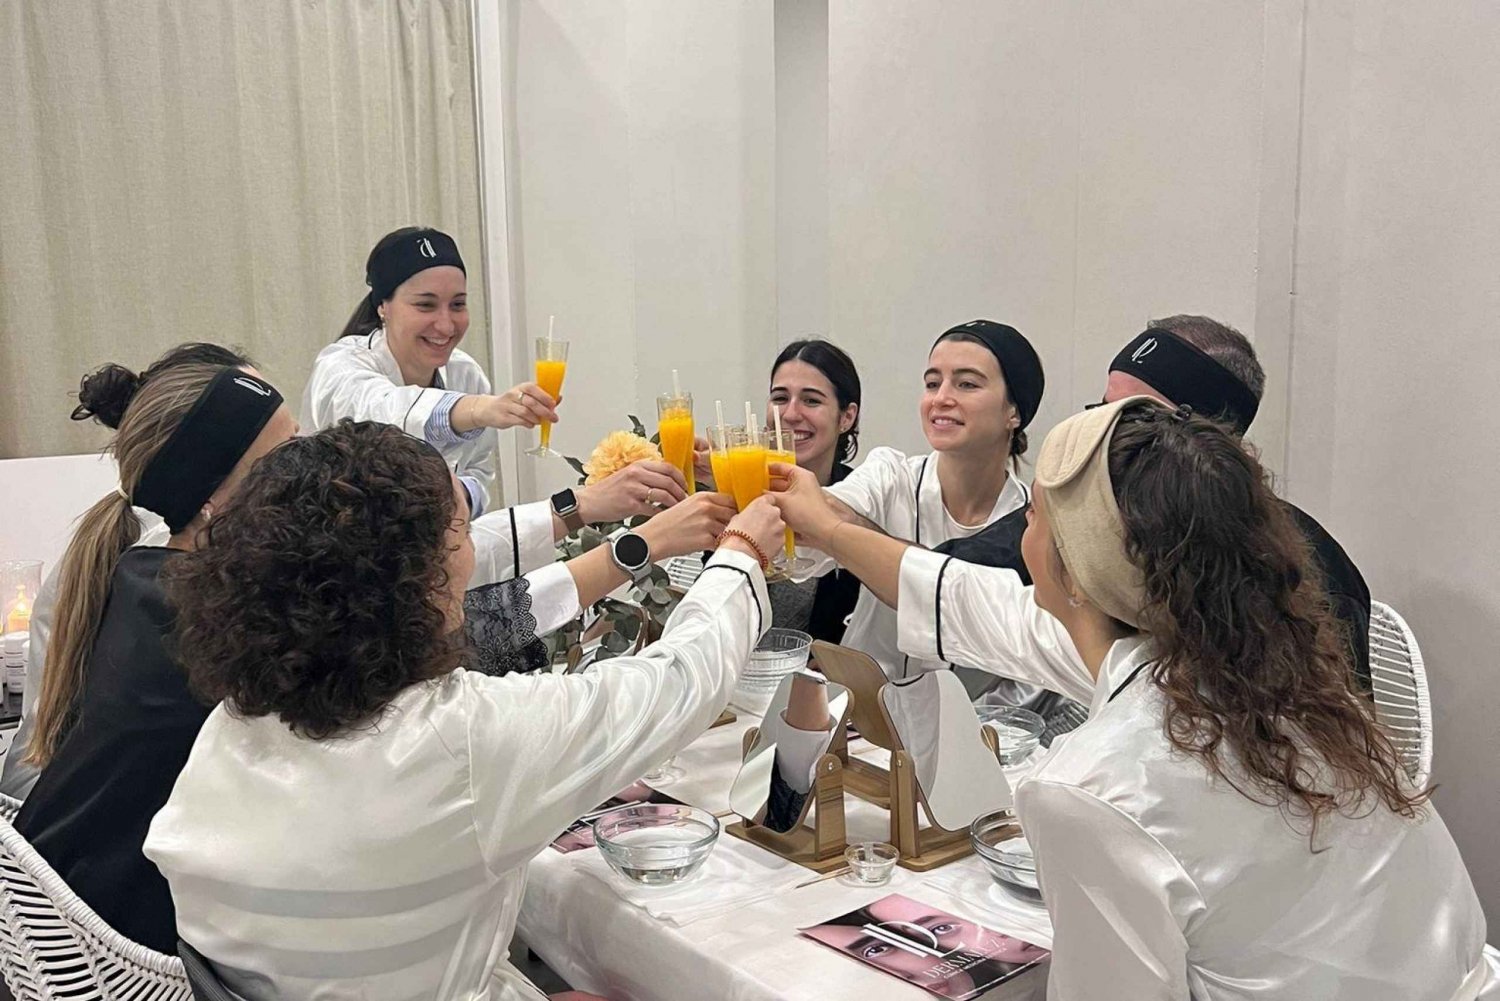 Sevilla: Beauty party, snack and drinks with friends